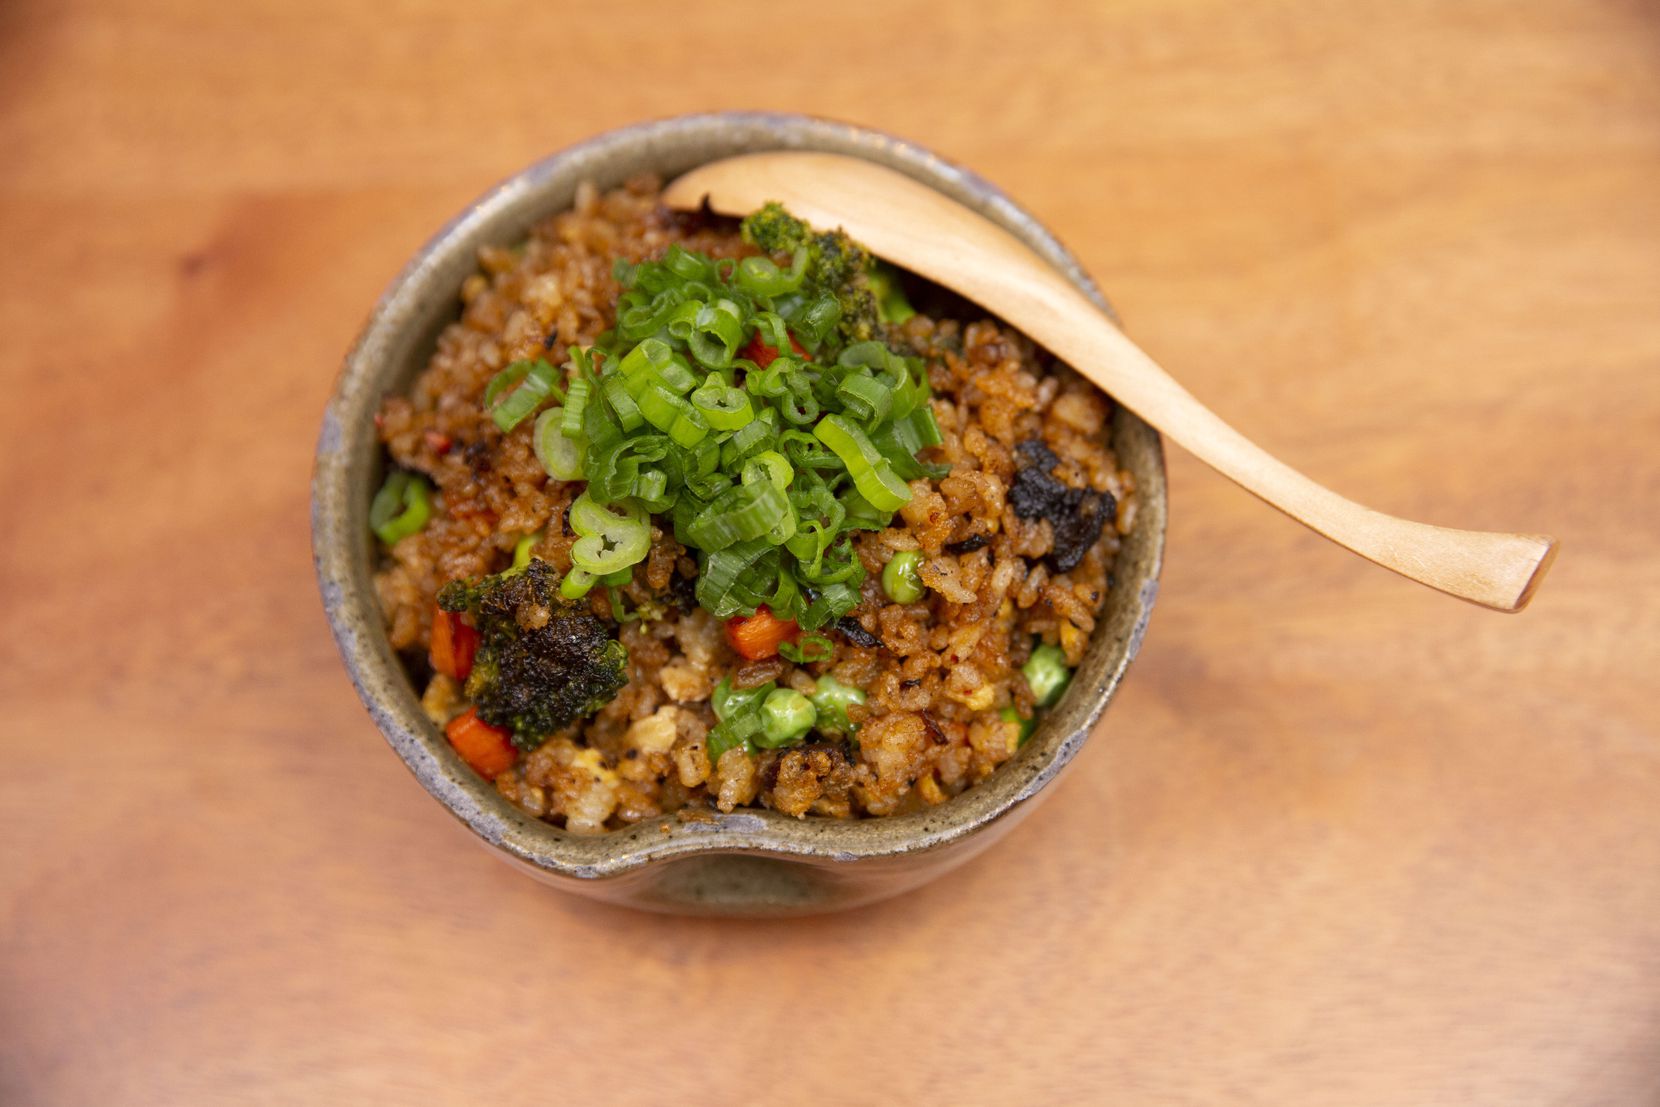 Chahan, a rich version of fried rice made with koji bacon